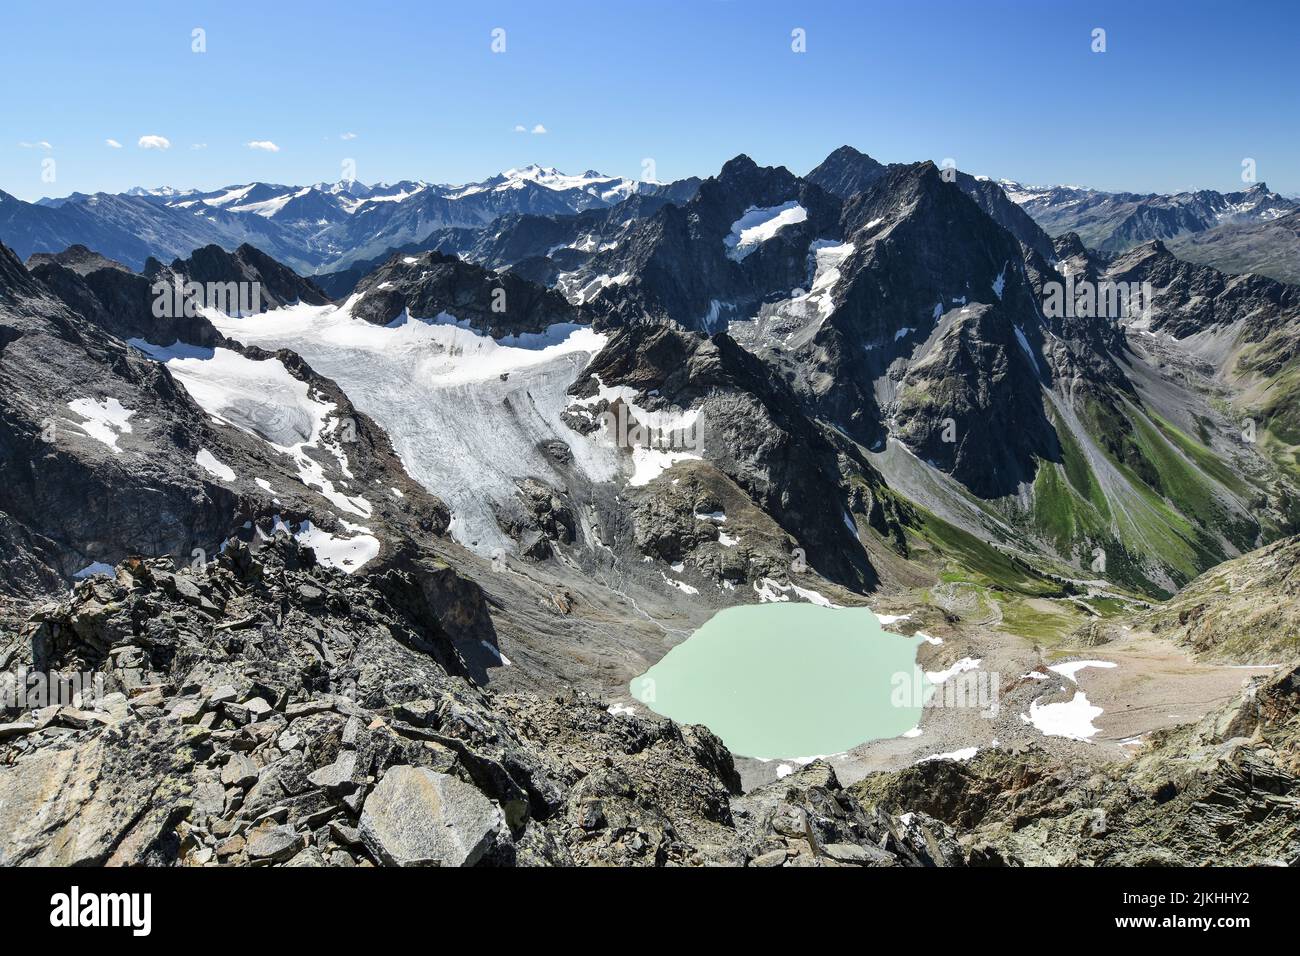 Climate change in the Ötztal Alps: melt water lake and shrinking glacier on hot summer day. Schweikertferner, Tyrol, Austria, Europe Stock Photo